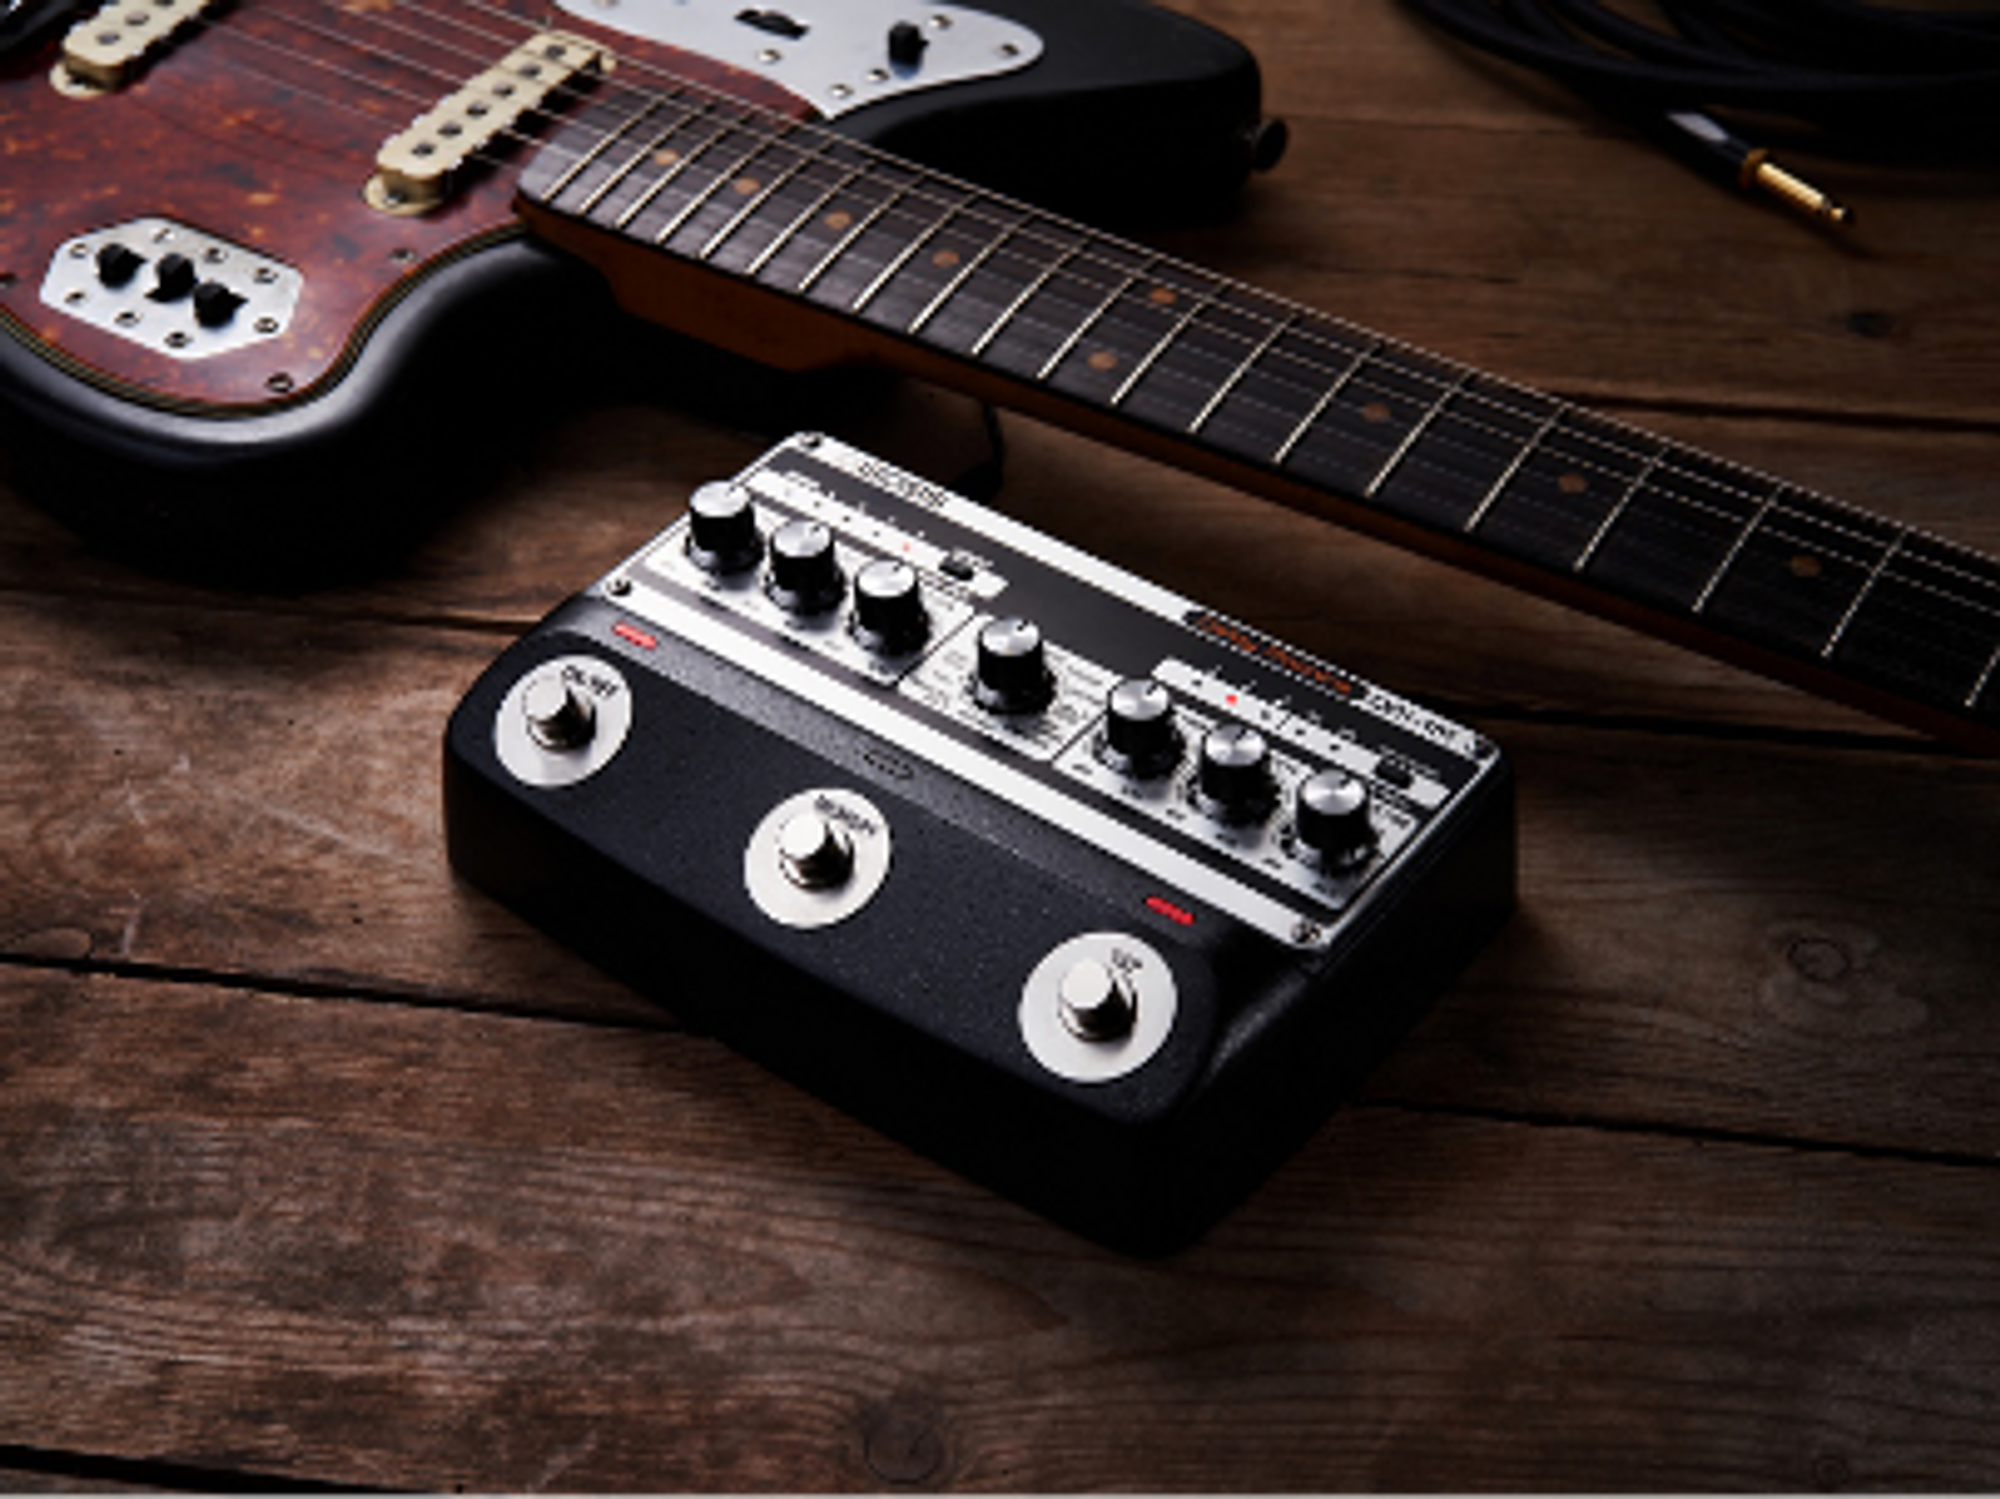 Boss Introduces the DM-101 Delay Machine